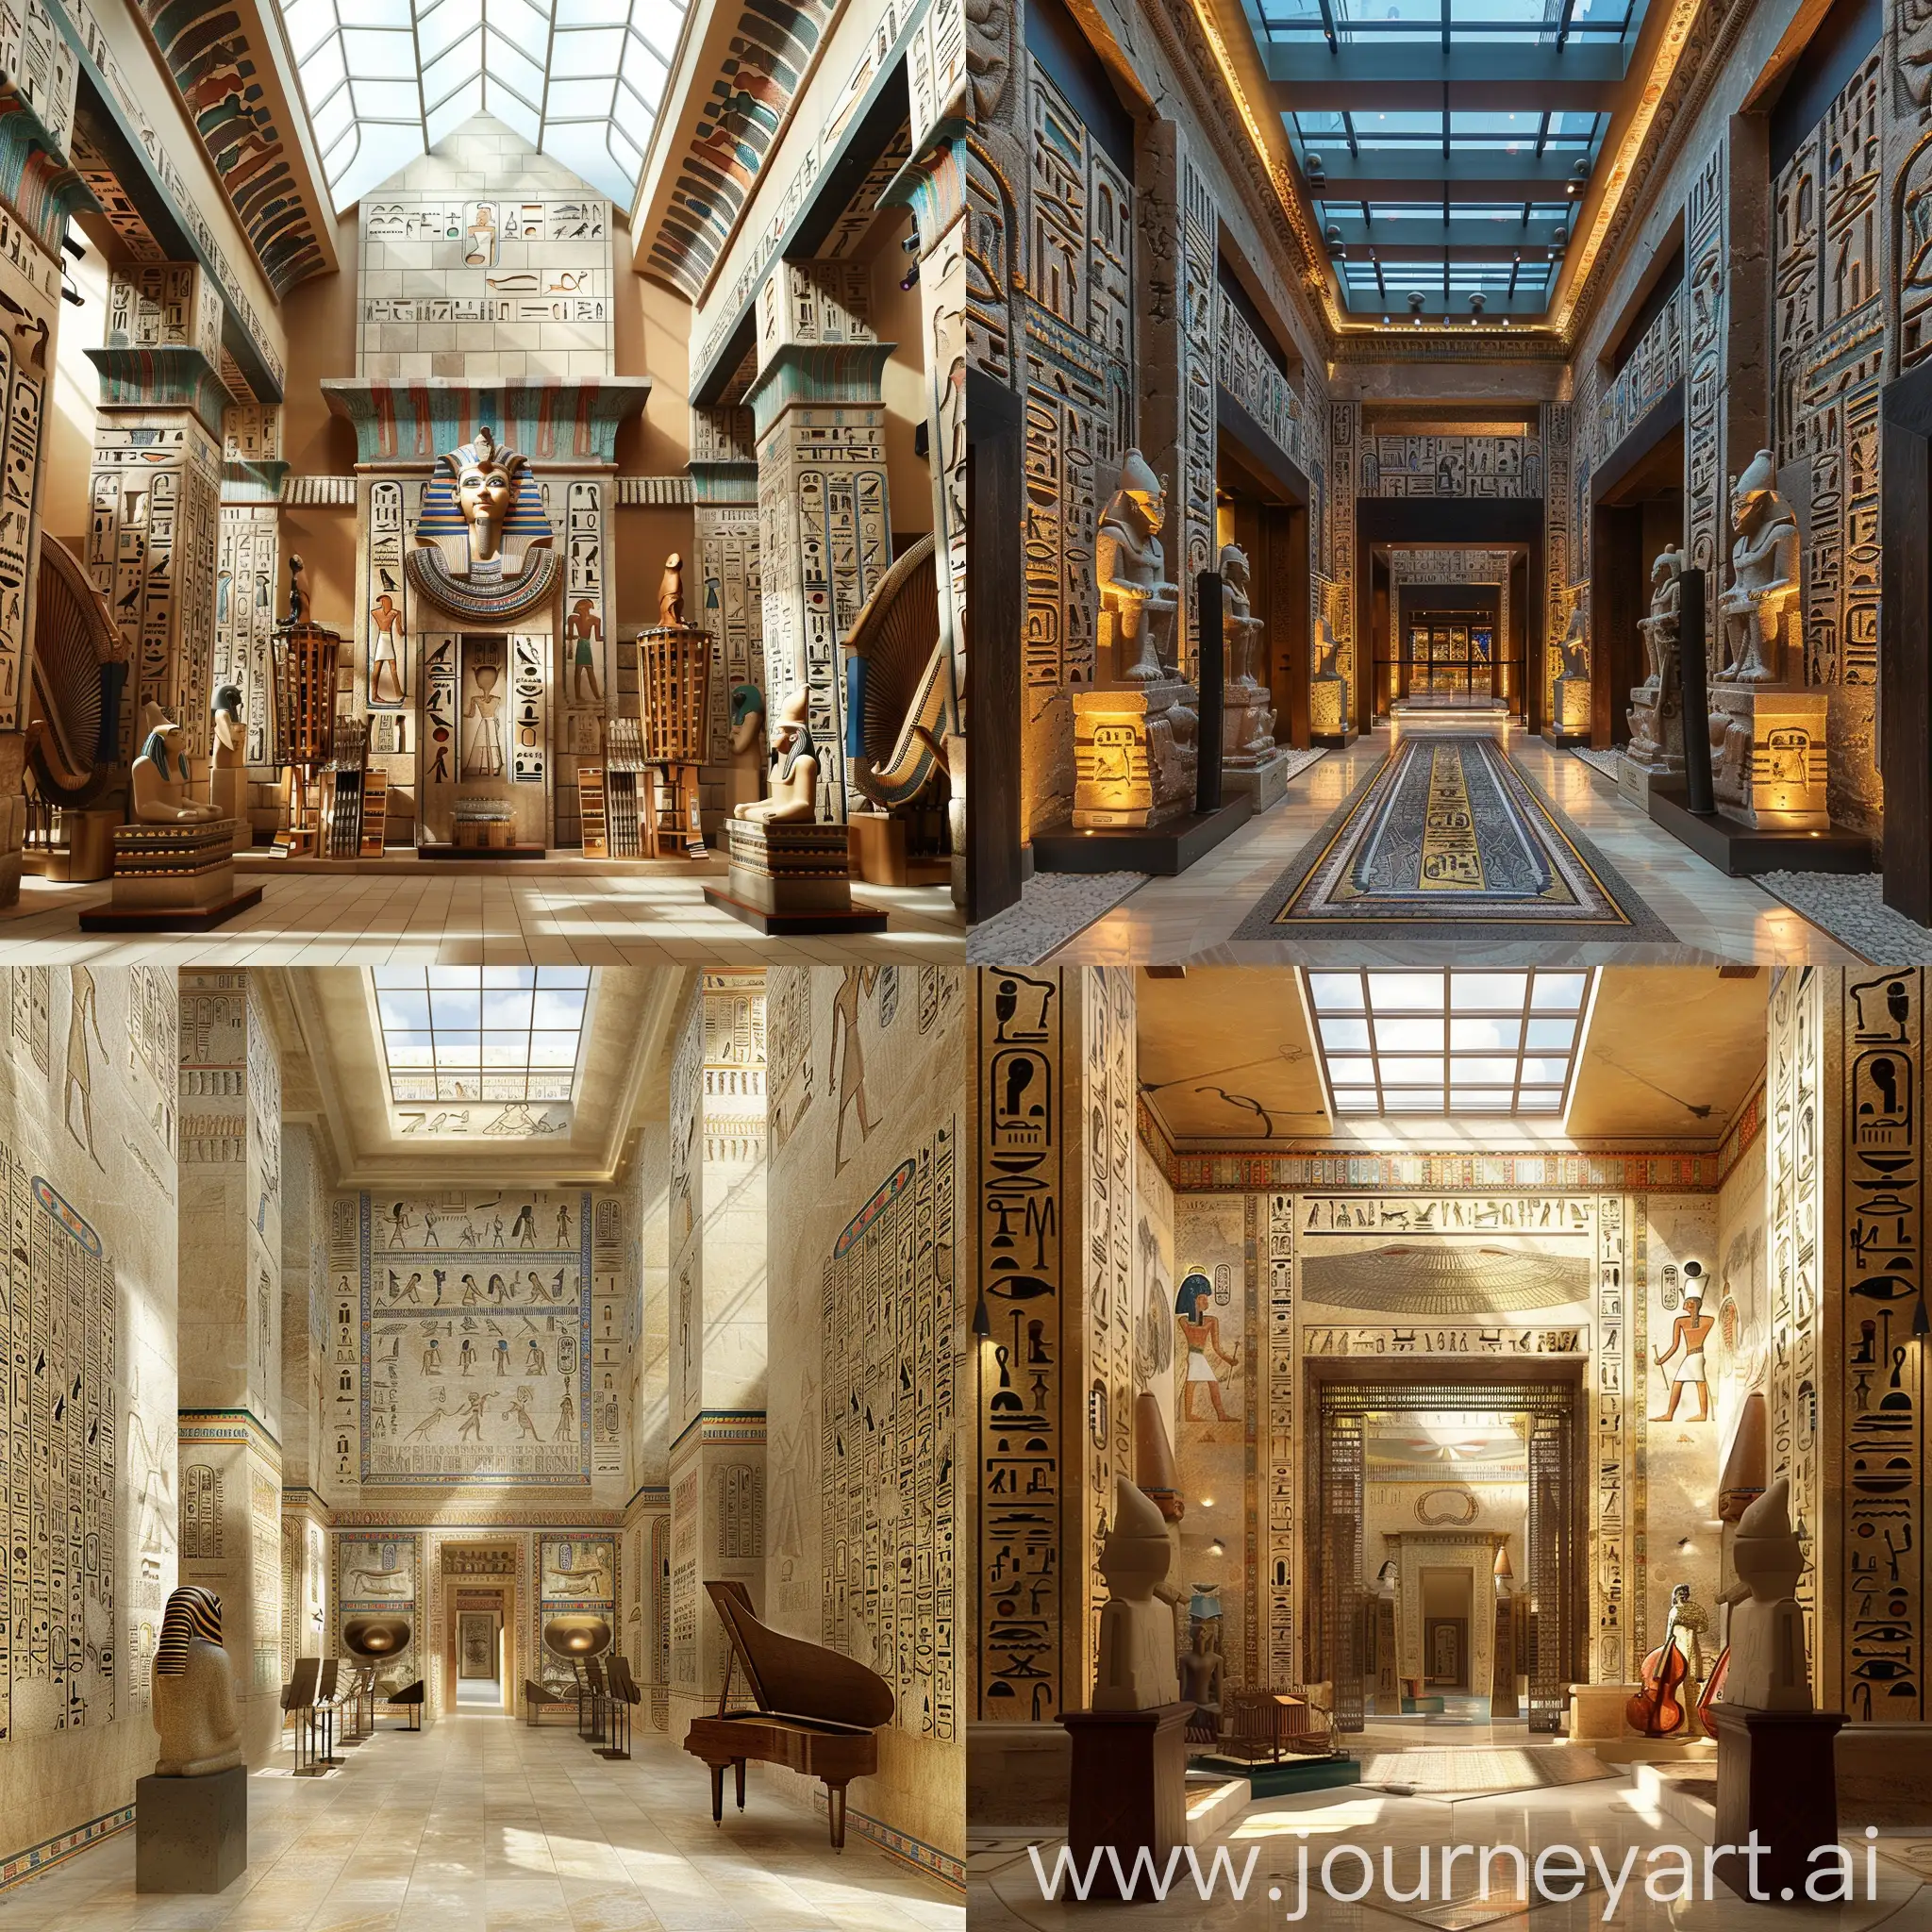 Luxurious-Pharaonic-Music-Museum-Entrance-with-Mosaics-and-Statues